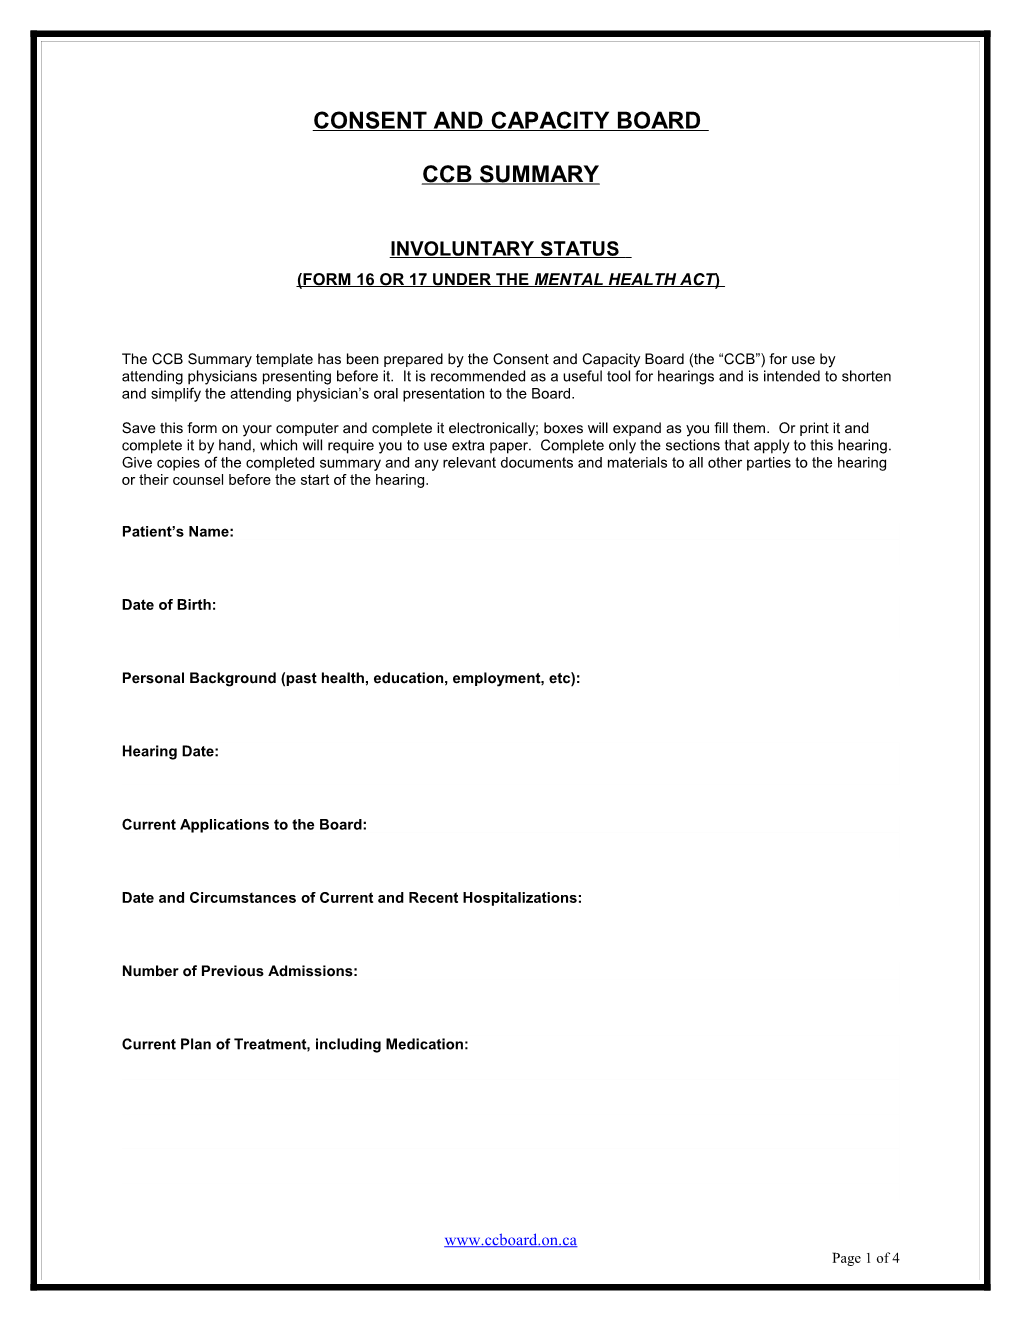 Summary for Consent and Capacity Board (Ccb)